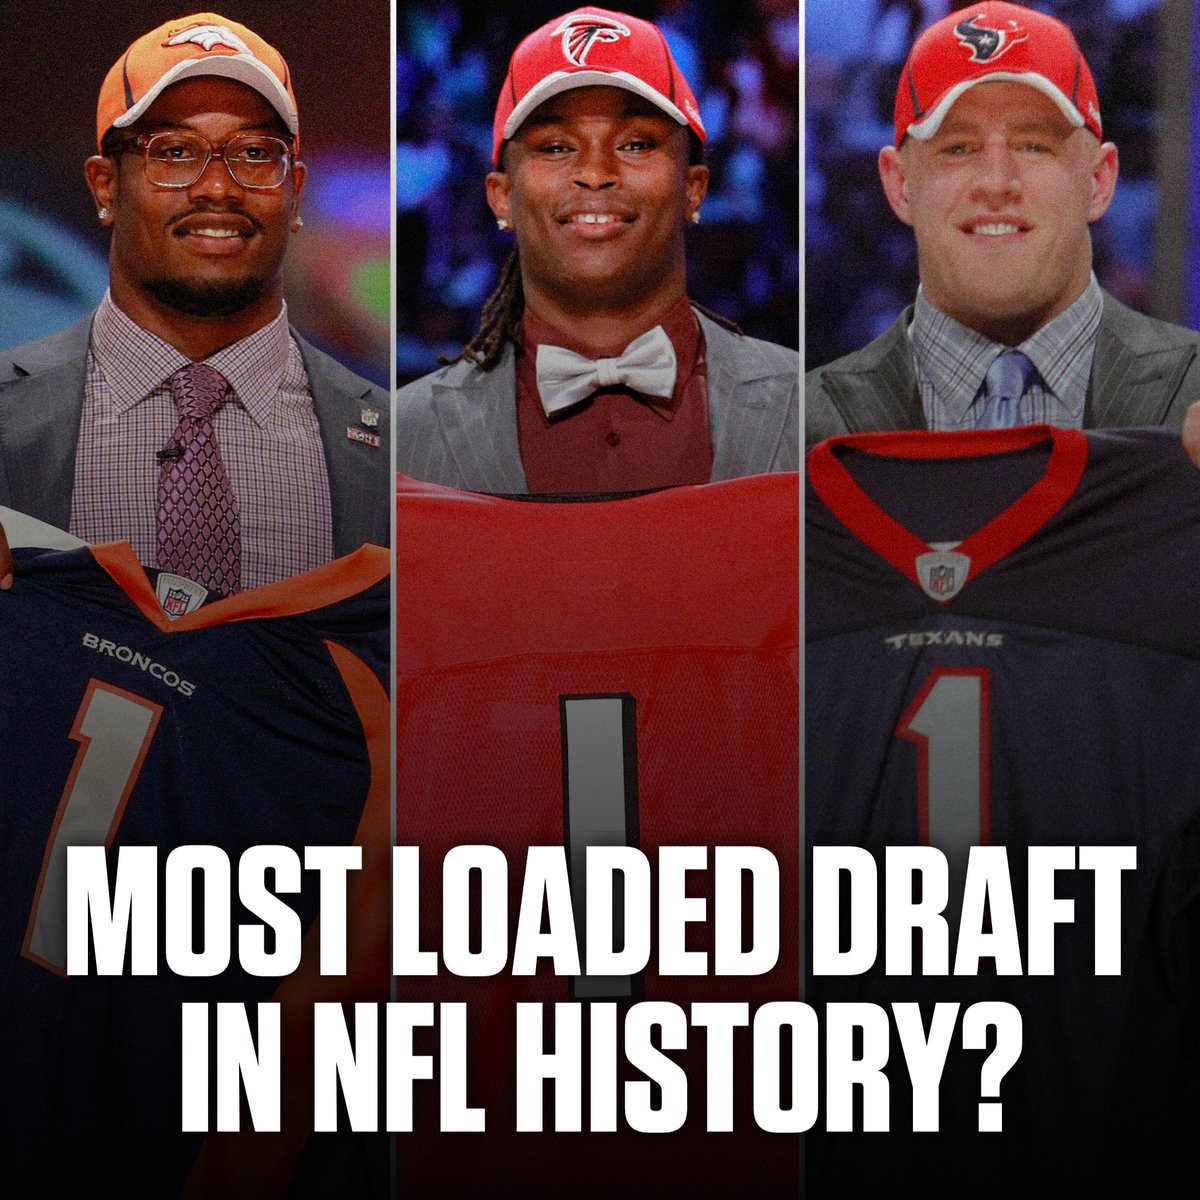 𝗧𝗥𝗨𝗘 𝗢𝗥 𝗙𝗔𝗟𝗦𝗘: The 2011 #NFL Draft is the best draft class of all time. 

It produced 6-8 sure-fire hall of famers, and multiple other stars. 

- Cam Newton (Maybe HOF)
- AJ Green (Likely HOF)
- Von Miller (HOF 🔒)
- Patrick Peterson (HOF 🔒)
- Julio Jones (HOF 🔒)
-